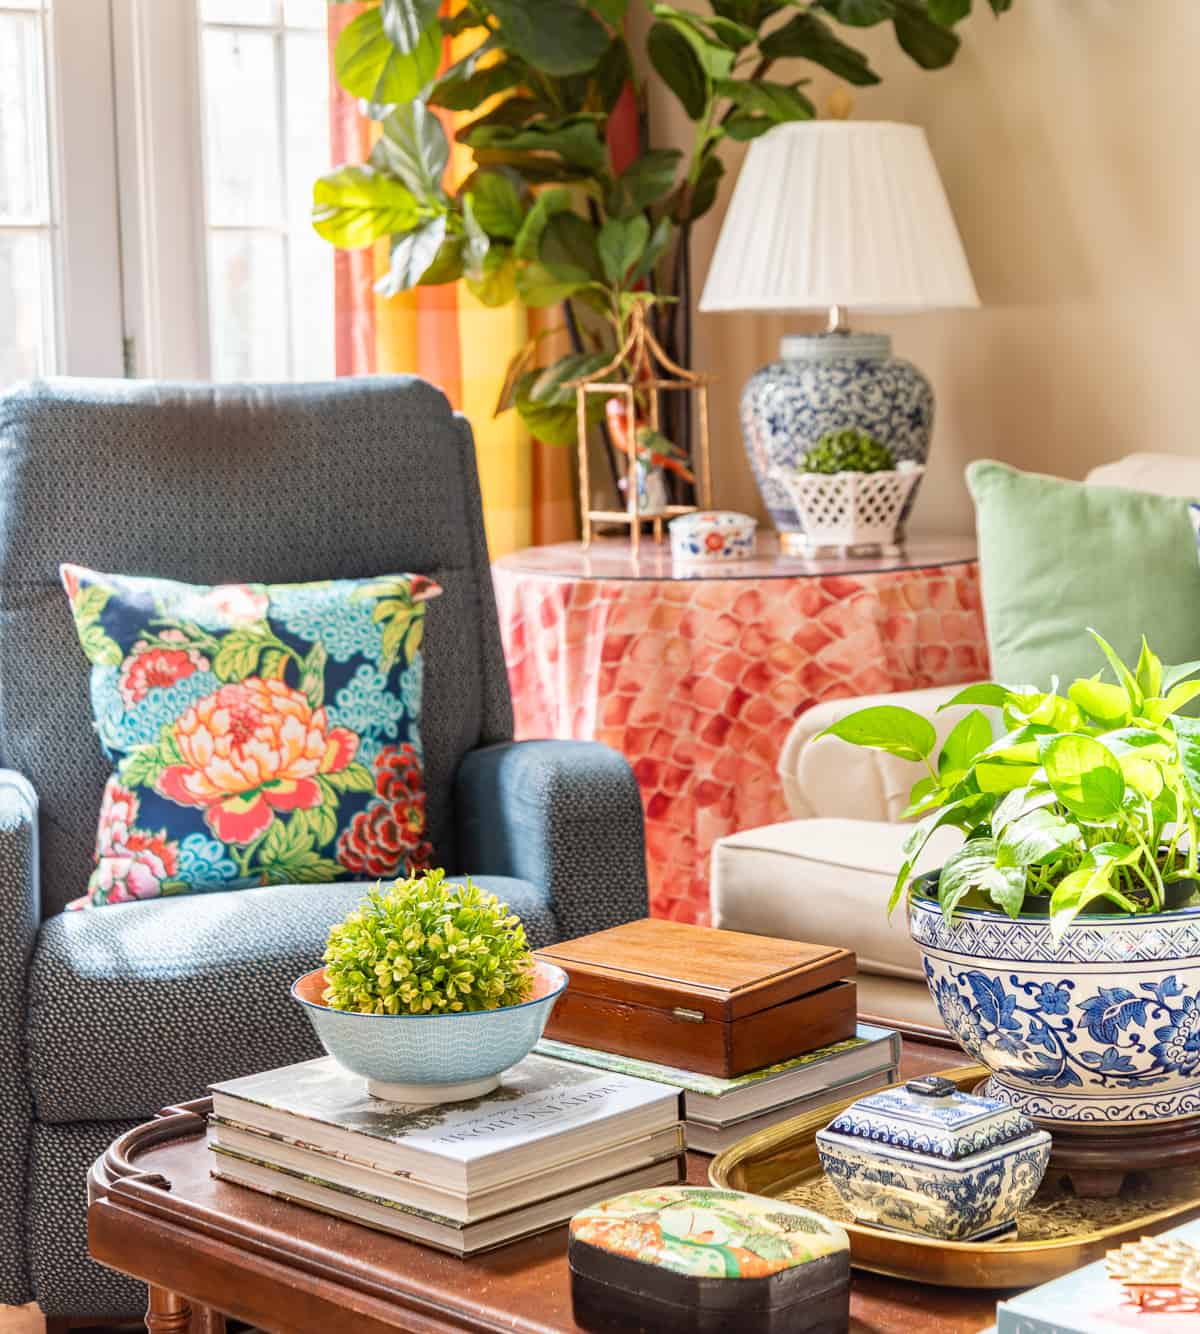 Foolproof Ideas for Decorating With Color This Spring